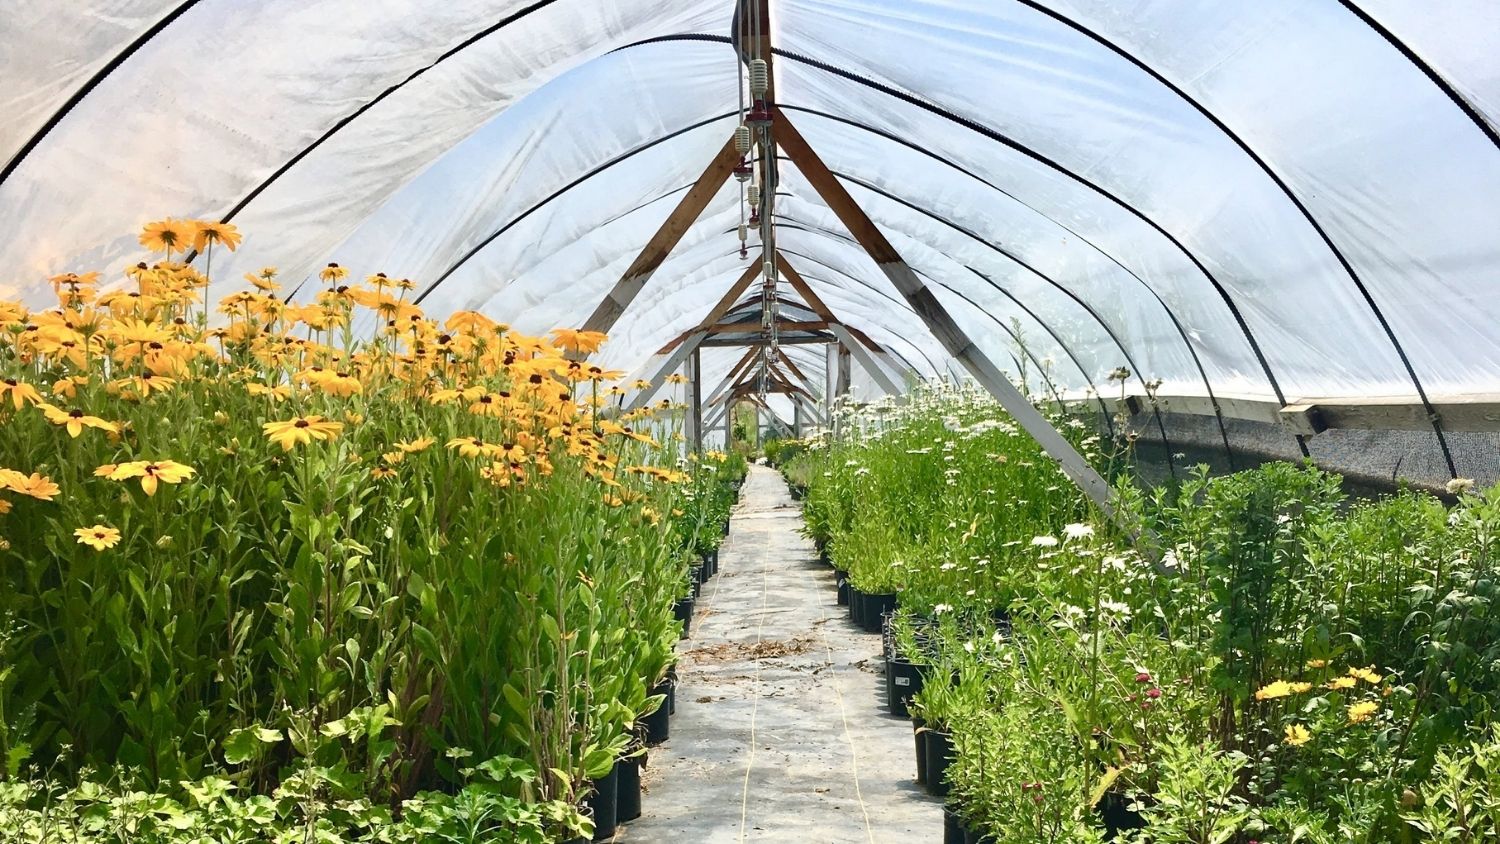 Black eyed susans - Green Industries Create Stronger Economy in North Carolina - College of Natural Resources News NC State University